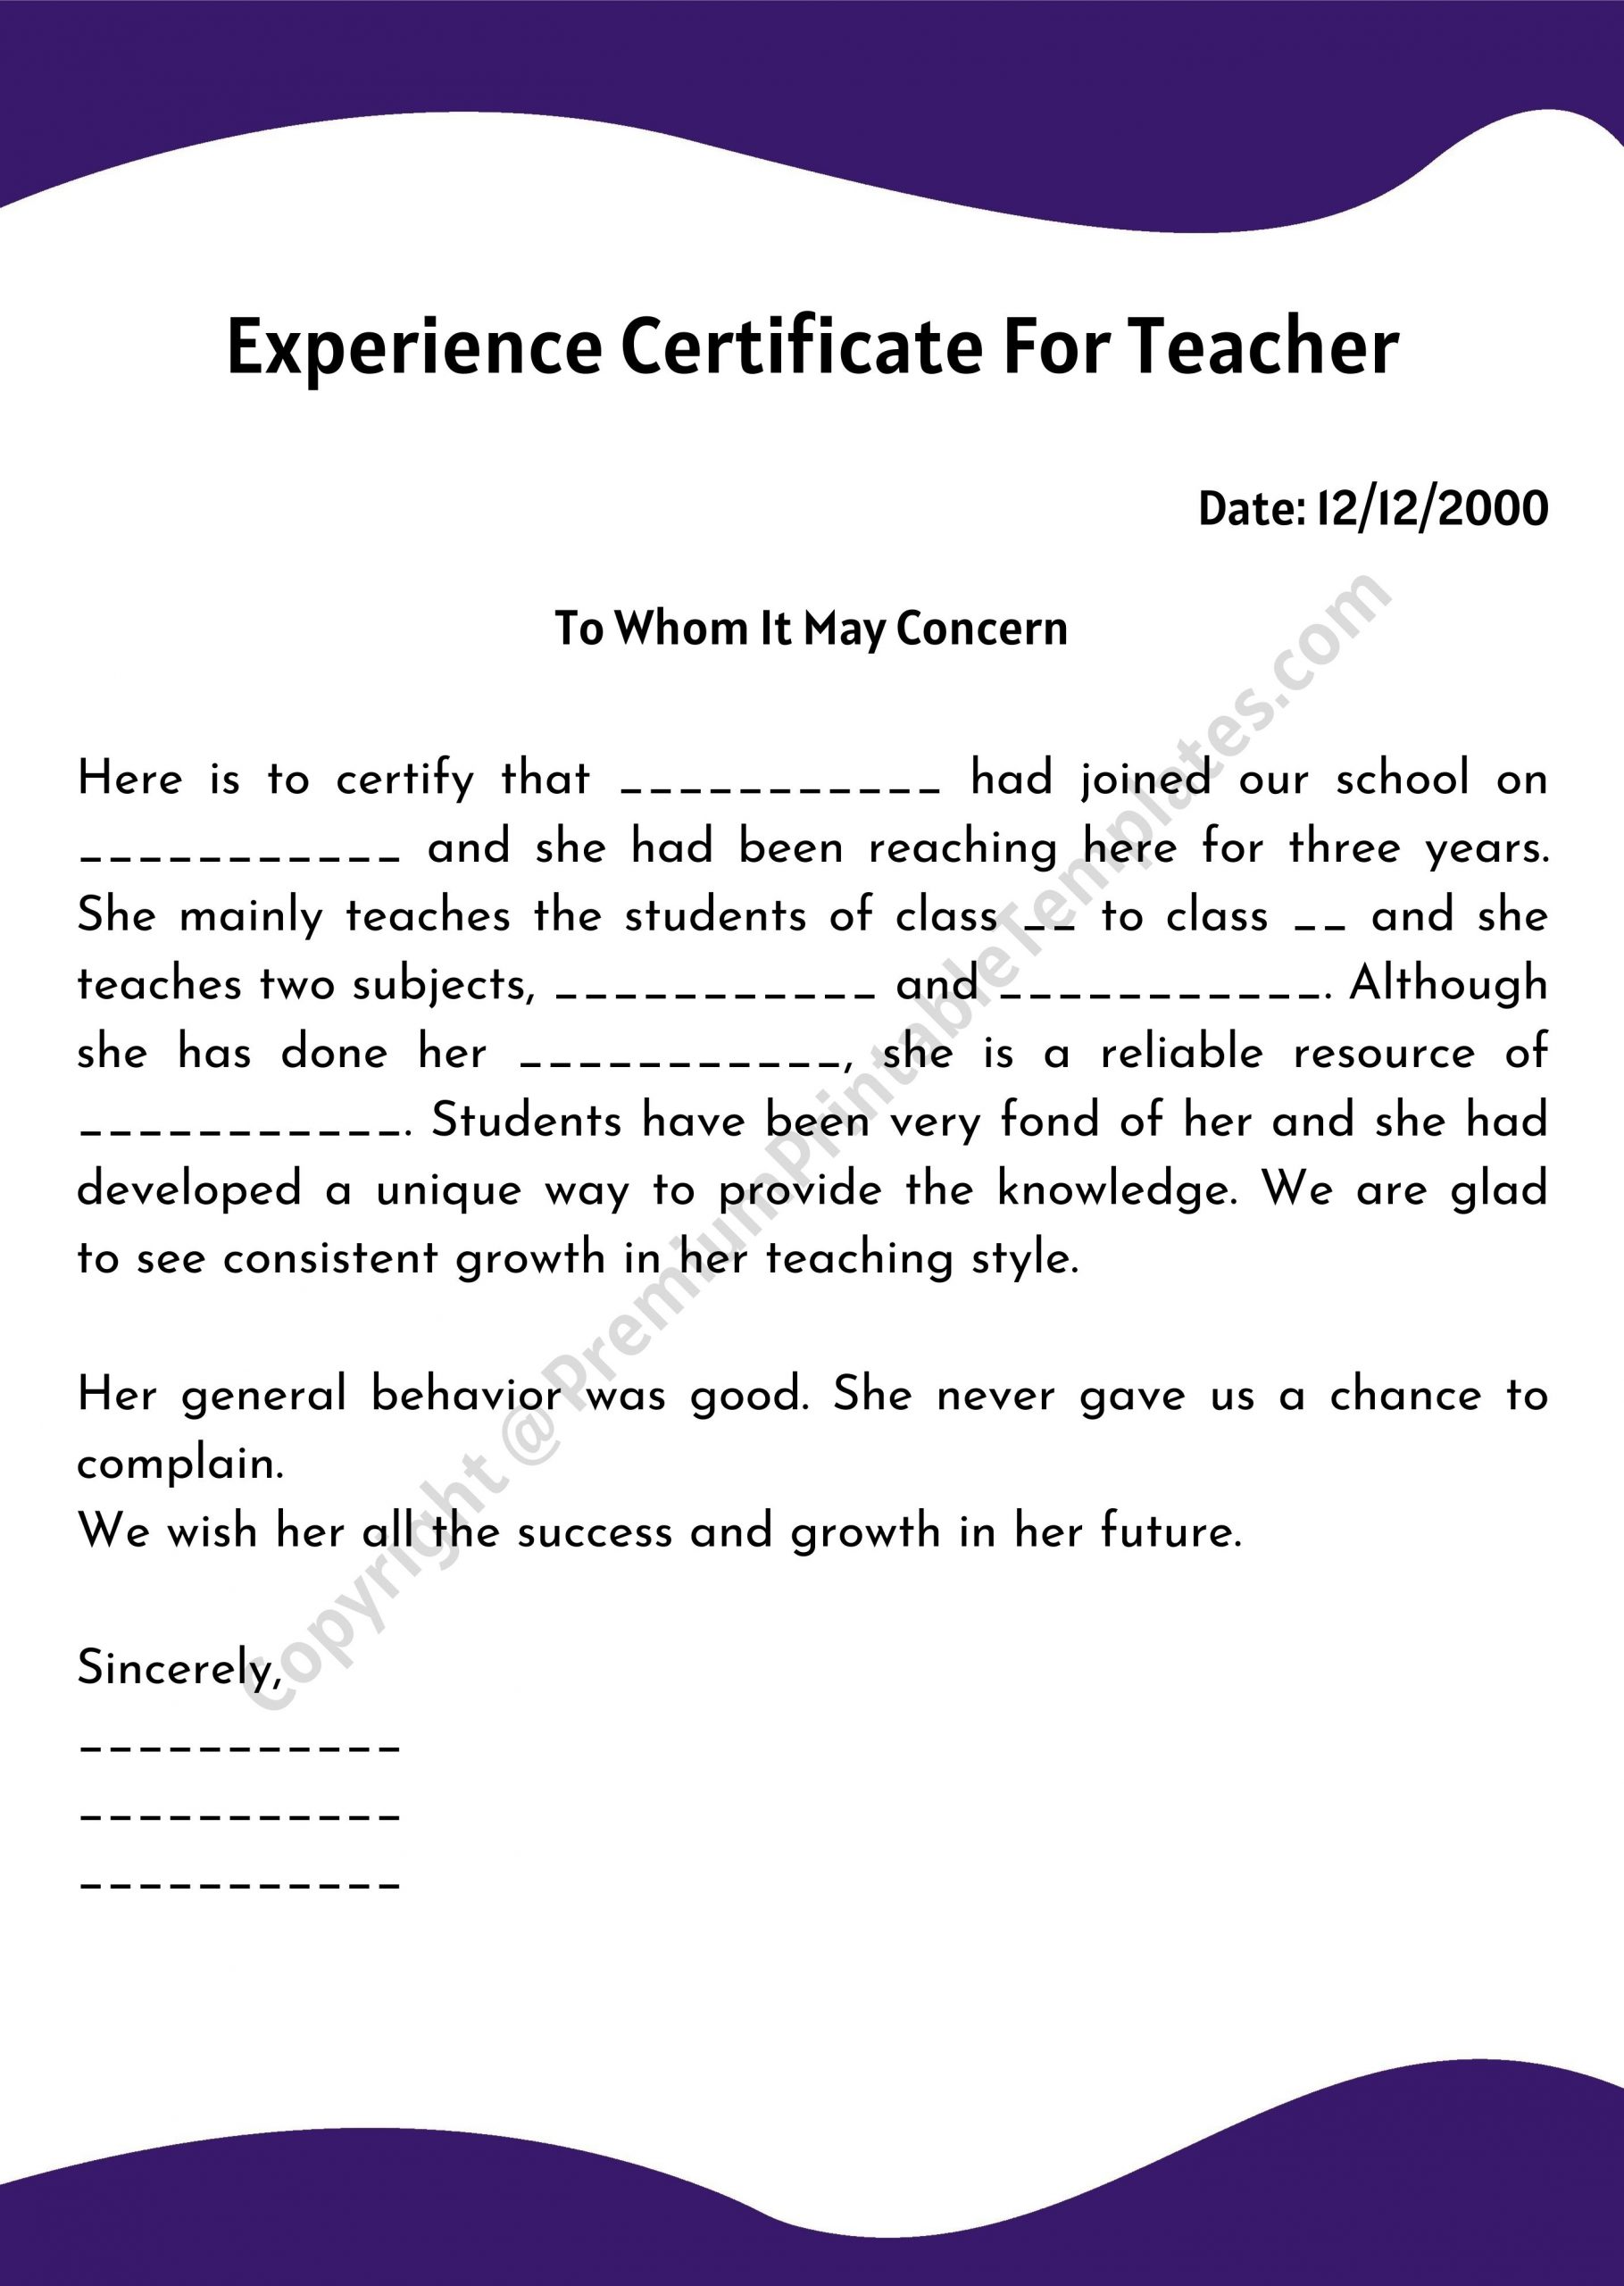 letter format for getting experience certificate